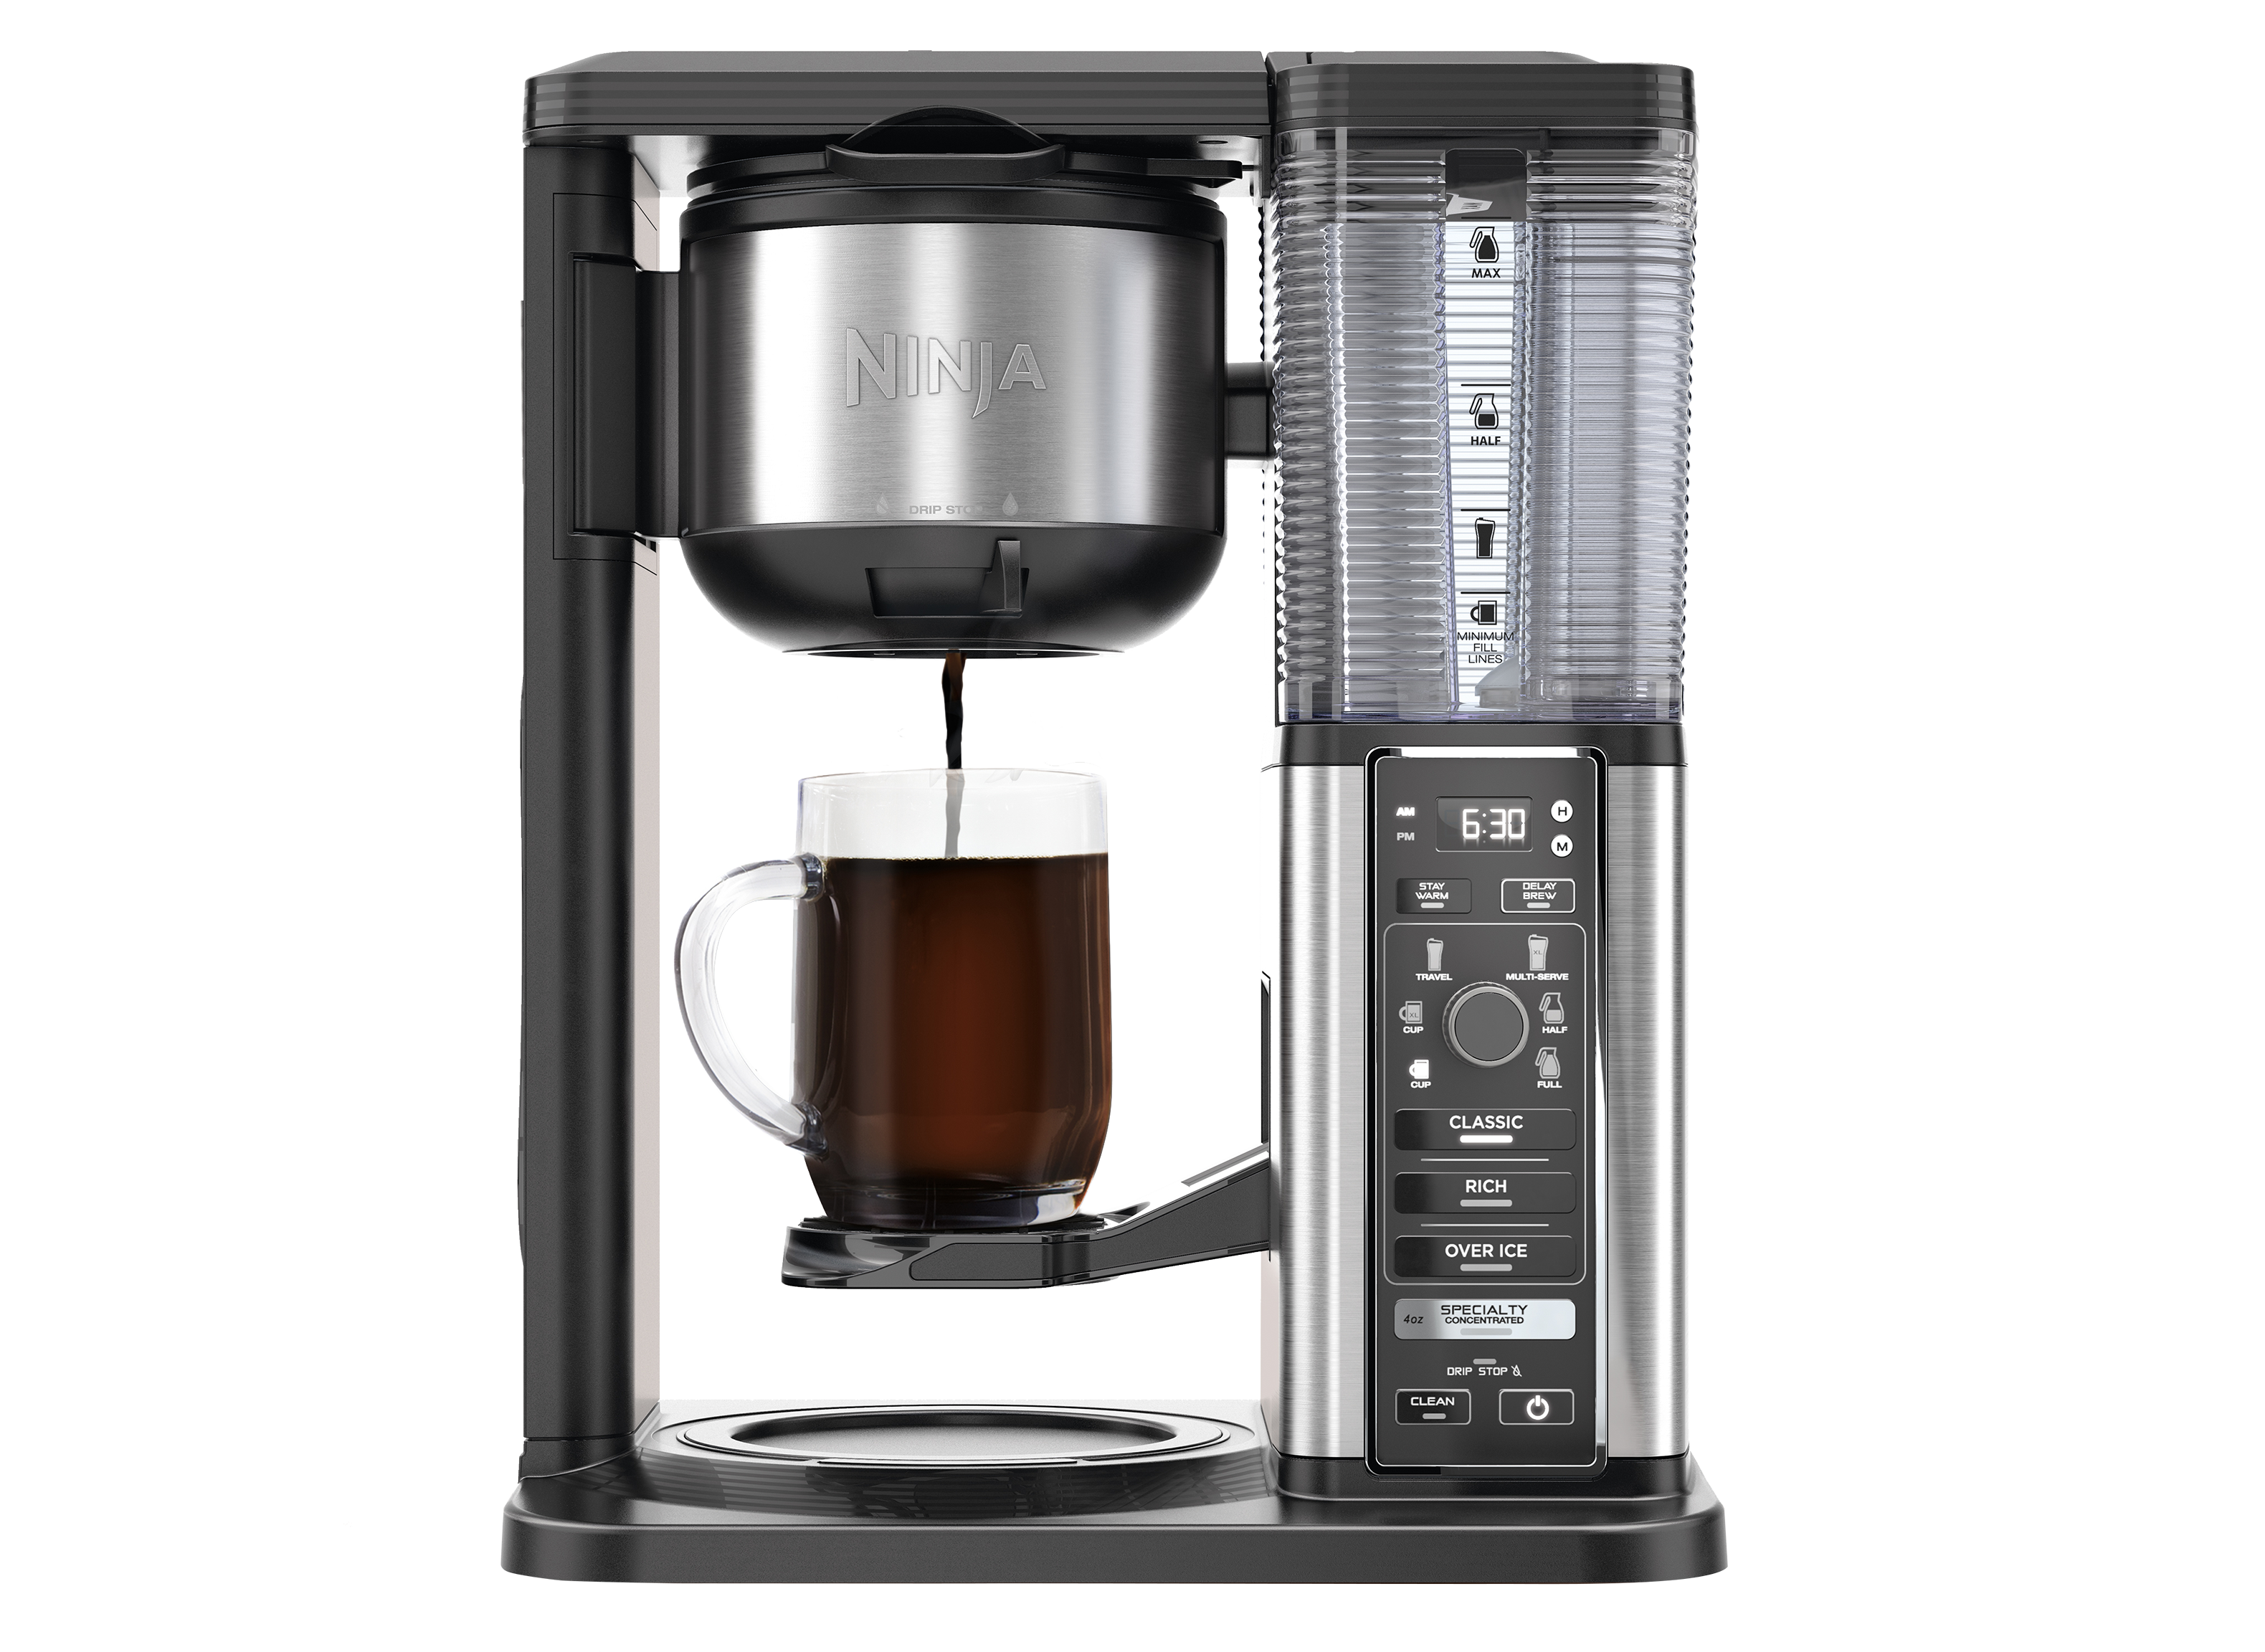 https://crdms.images.consumerreports.org/prod/products/cr/models/398936-drip-coffee-makers-ninja-specialty-cm401-10006616.png